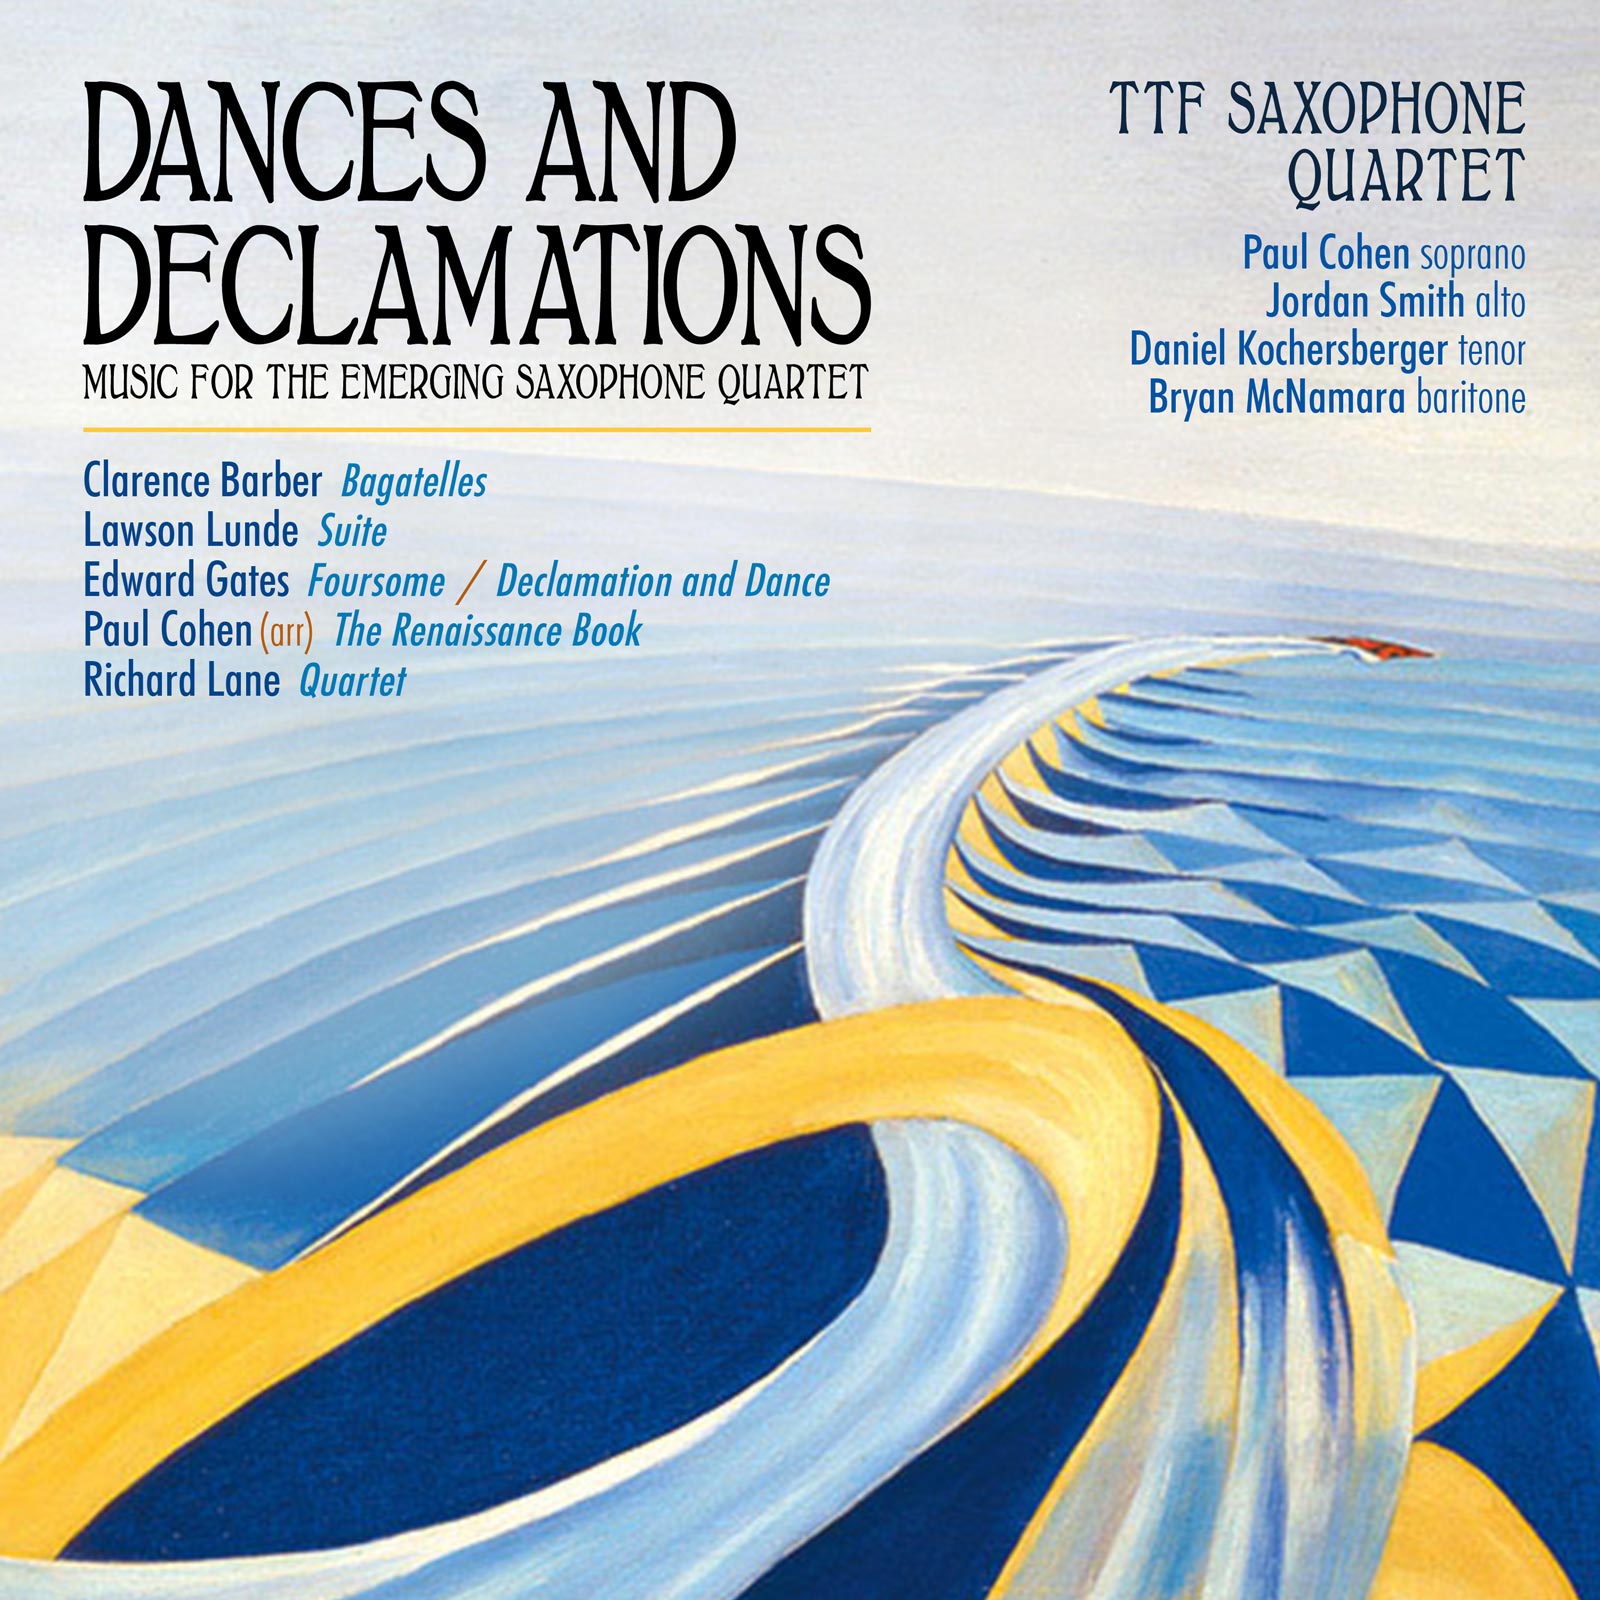 Dances and Declamations